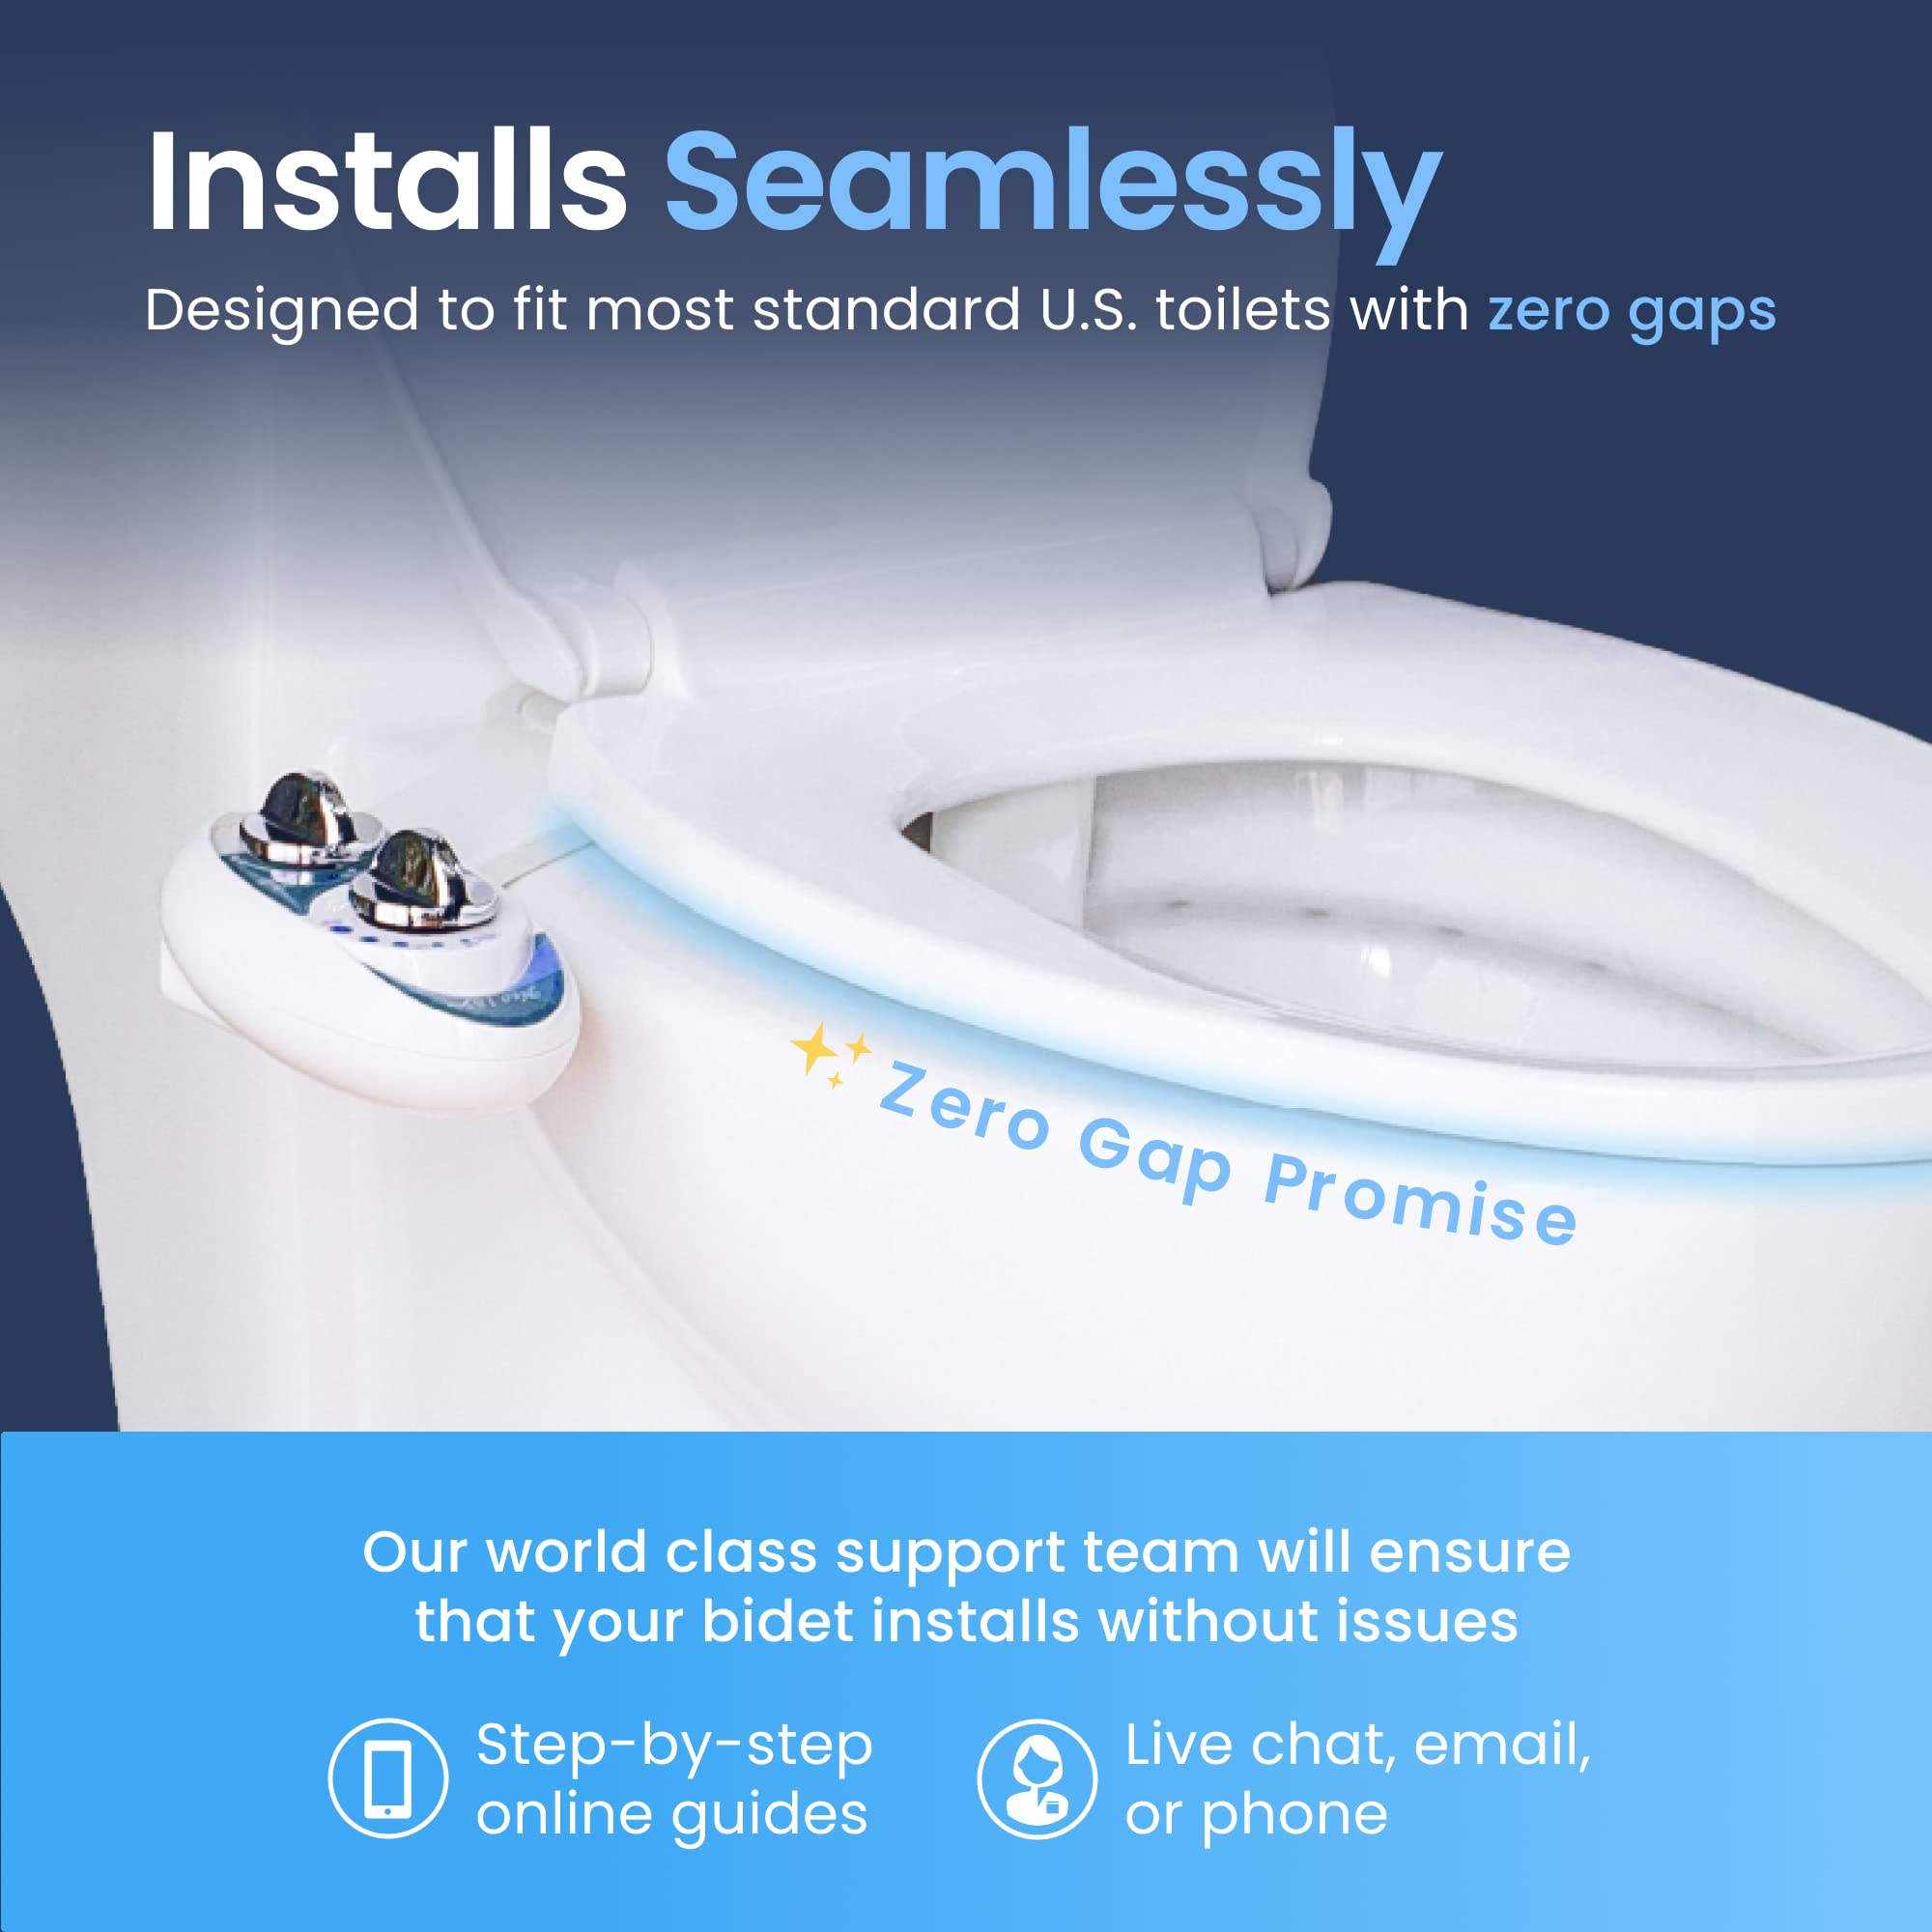 LUXE Bidet NEO 180 - Self-Cleaning, Dual Nozzle, Non-Electric Bidet Attachment for Toilet Seat, Adjustable Water Pressure, Rear and Feminine Wash, Lever Control (Blue), 13.5 x 7 x 3 inches